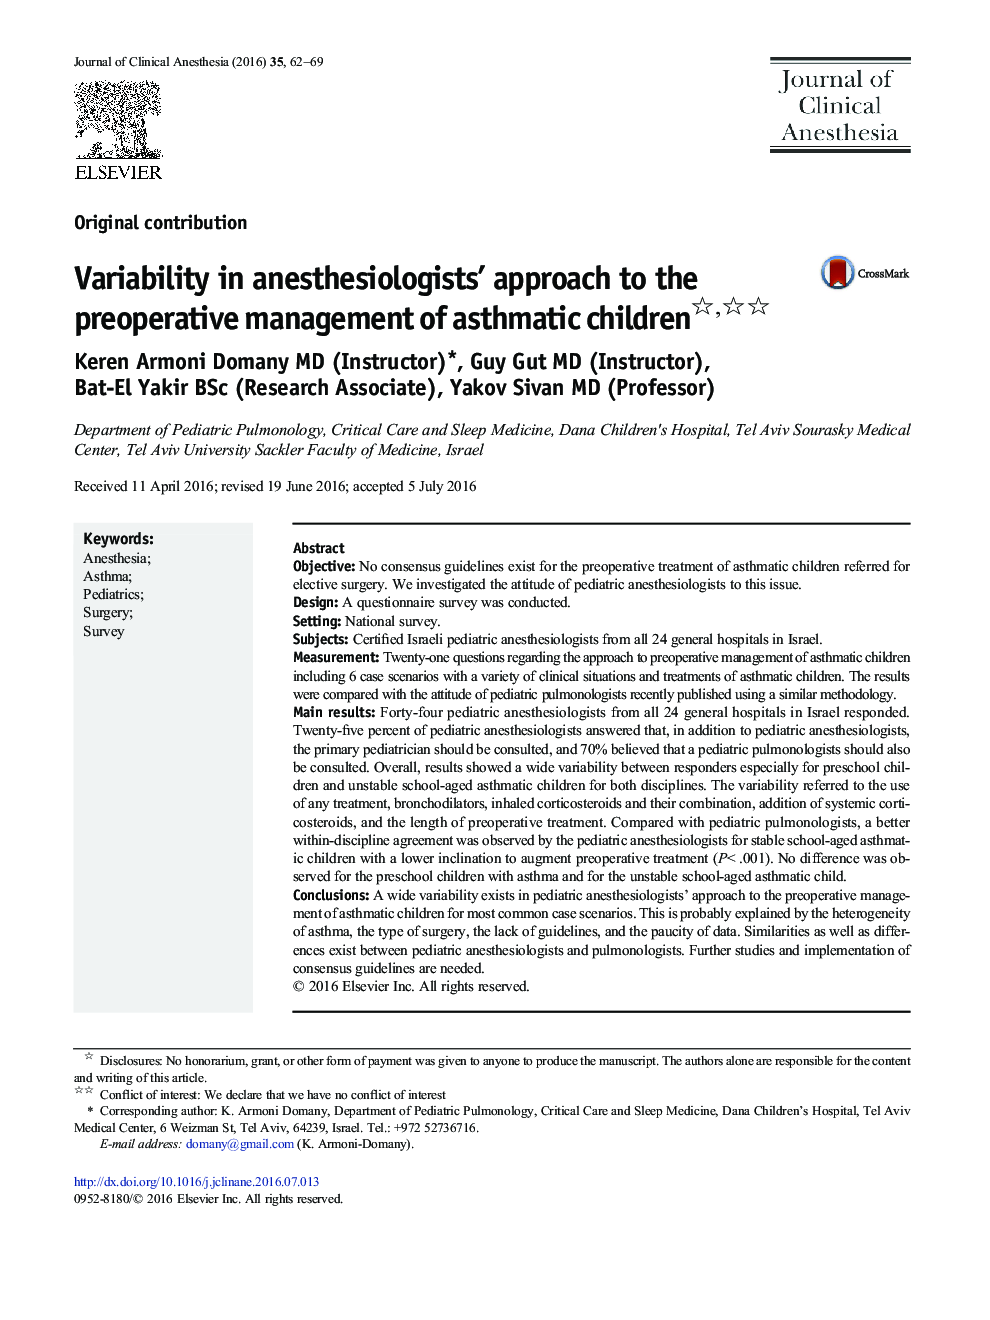 Variability in anesthesiologists' approach to the preoperative management of asthmatic children